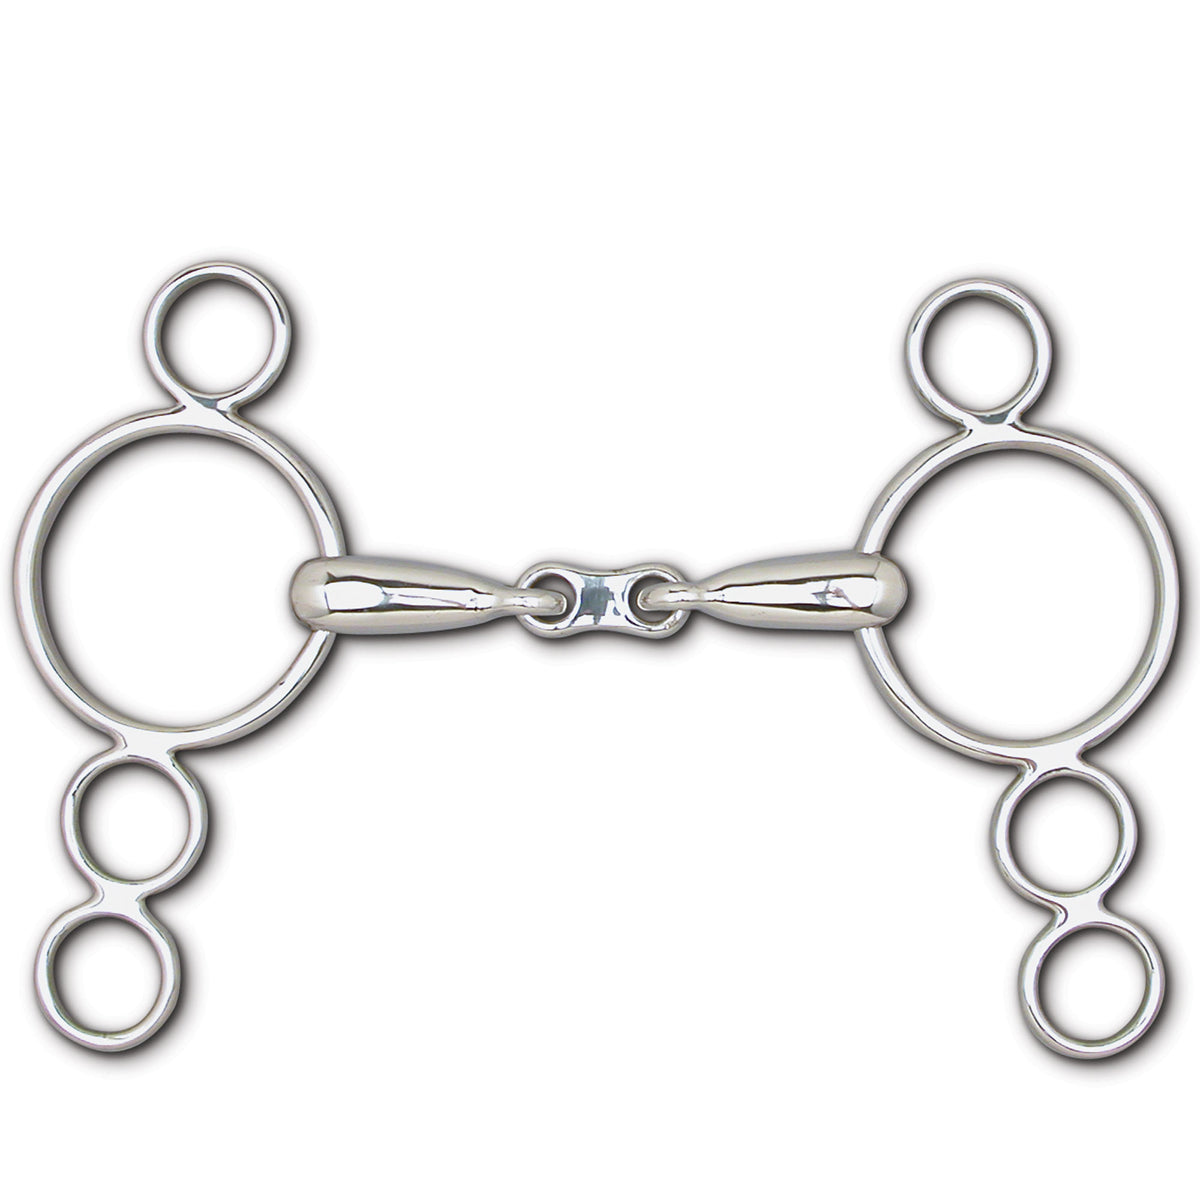 Toklat Hollow Mouth French Link 4-Ring Continental Gag Bit